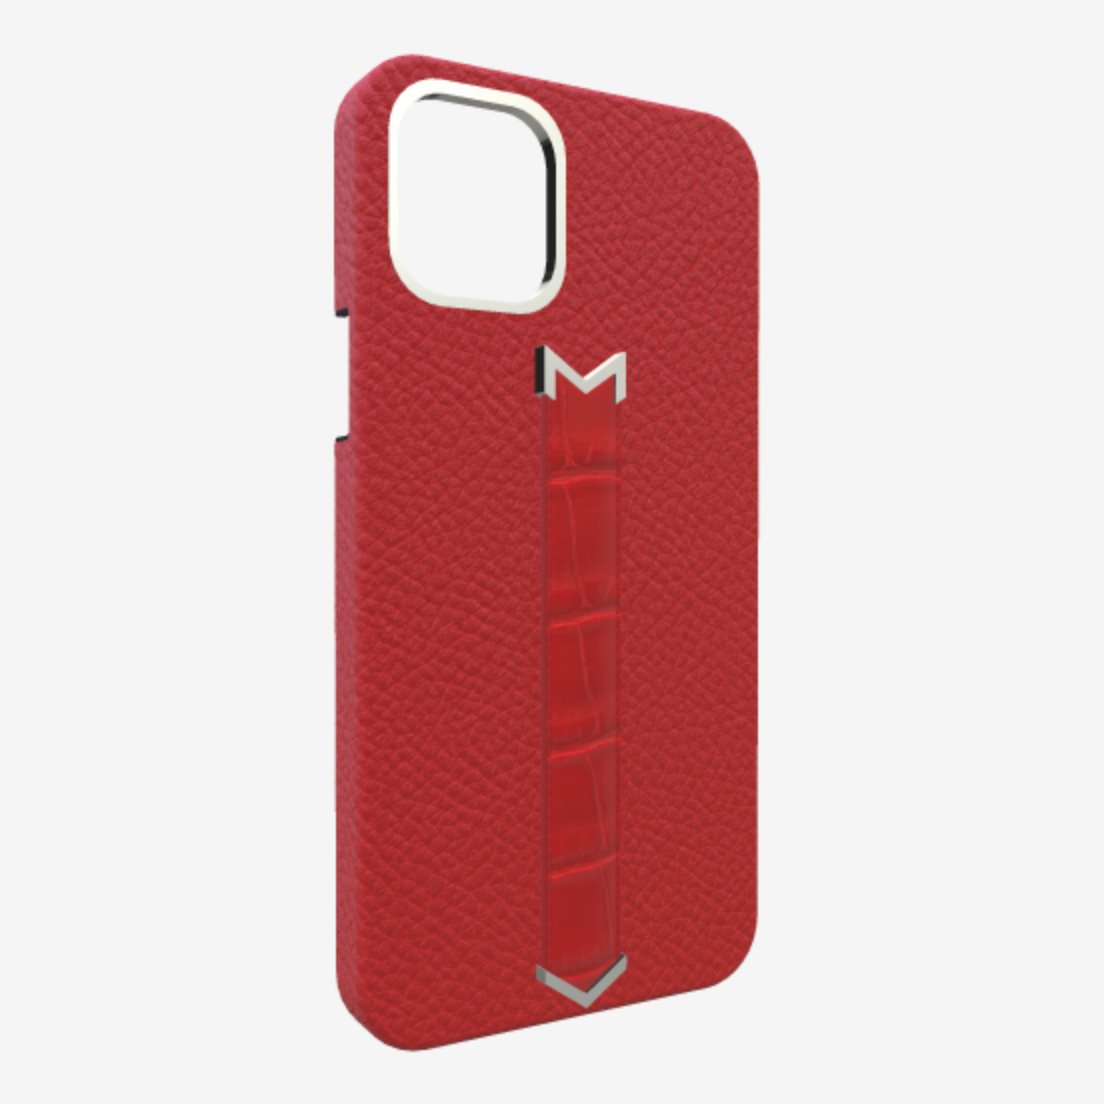 Silver Finger Strap Case for iPhone 13 Pro in Genuine Calfskin and Alligator Glamour-Red Glamour-Red 